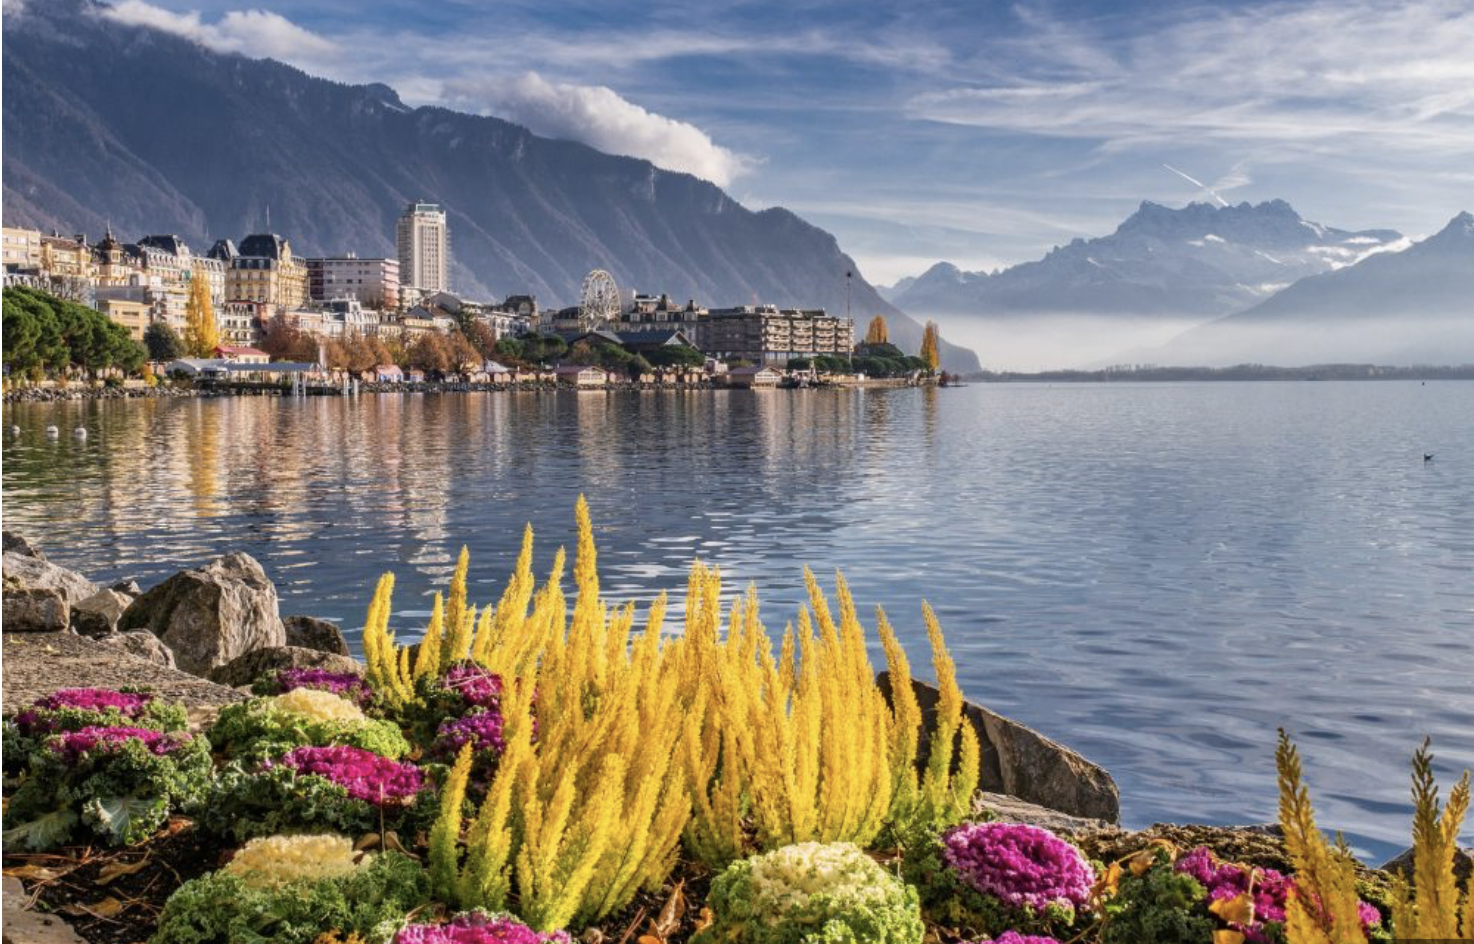 Montreux and the surrounding area